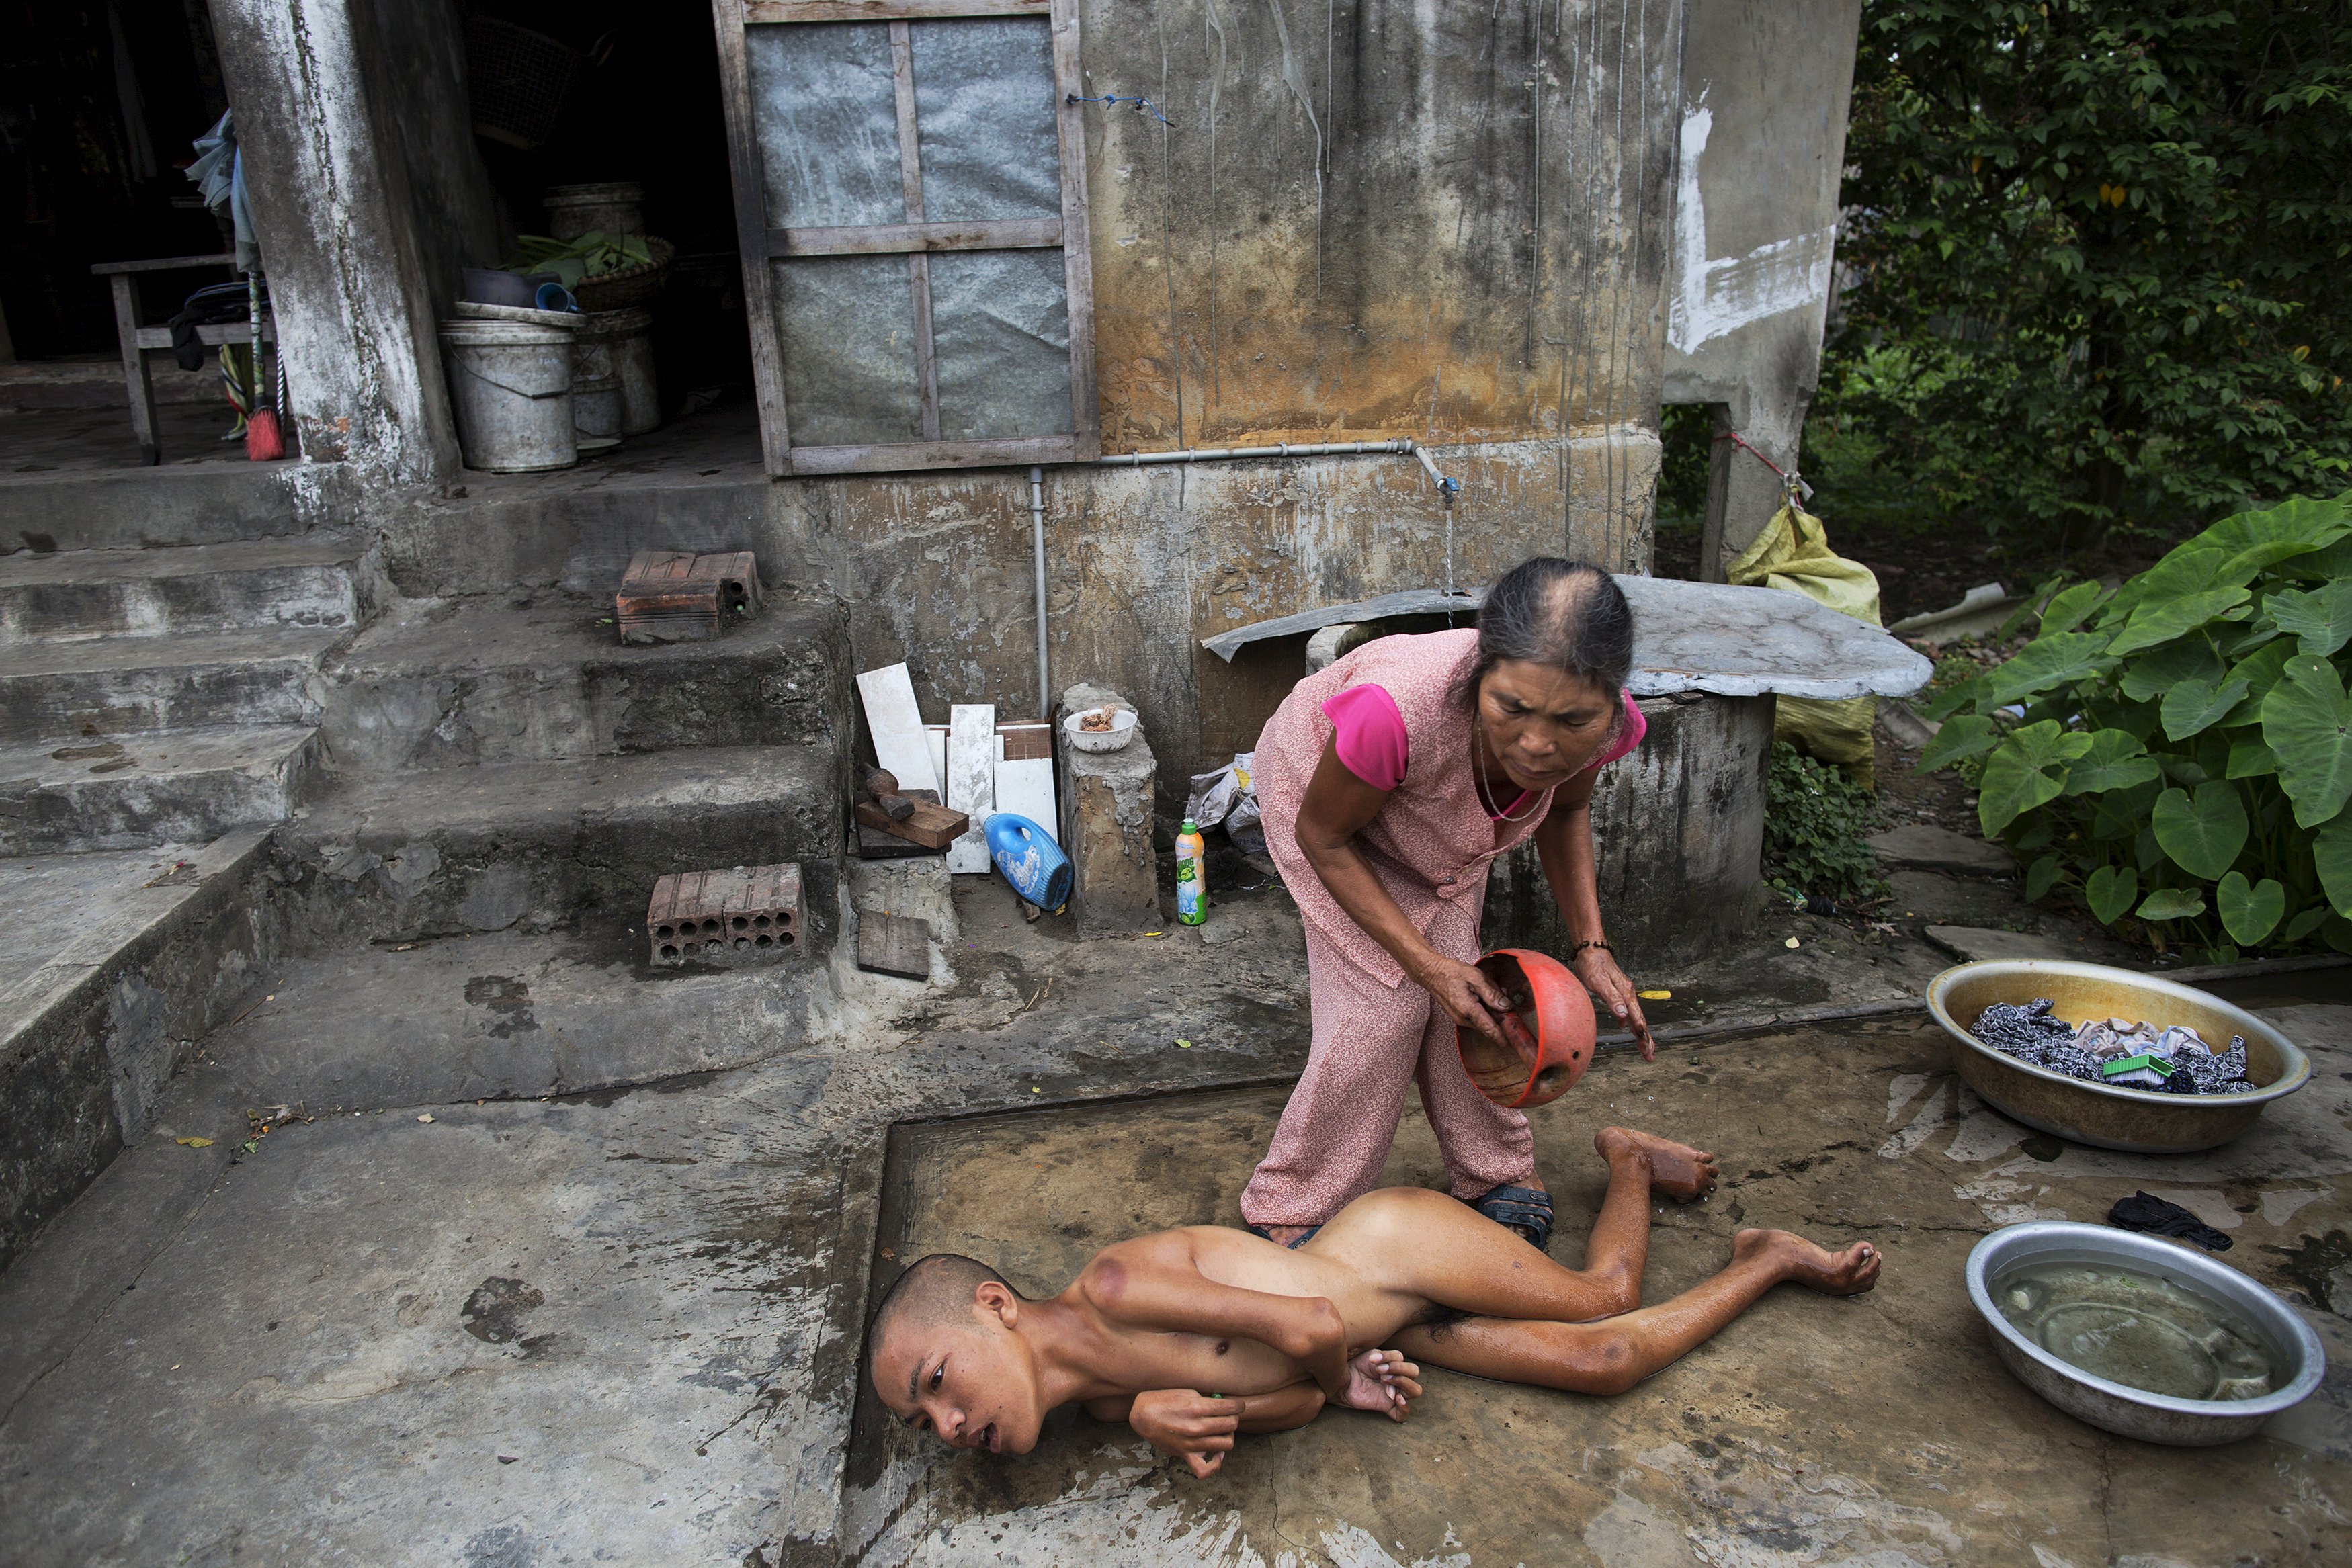 Tang Thi Thang baths her disabled son Doan Van Quy outside their family home in Truc Ly, in Vietnam's Quang Binh Province April 11, 2015. Doan Van Quy's father, a soldier who served on 12.7 mm anti-aircraft guns during the Vietnam War, said he lived in several areas that were contaminated by Agent Orange. Two of his sons were born with serious health problems and the family and local health officials link their illnesses to their father's exposure to Agent Orange.